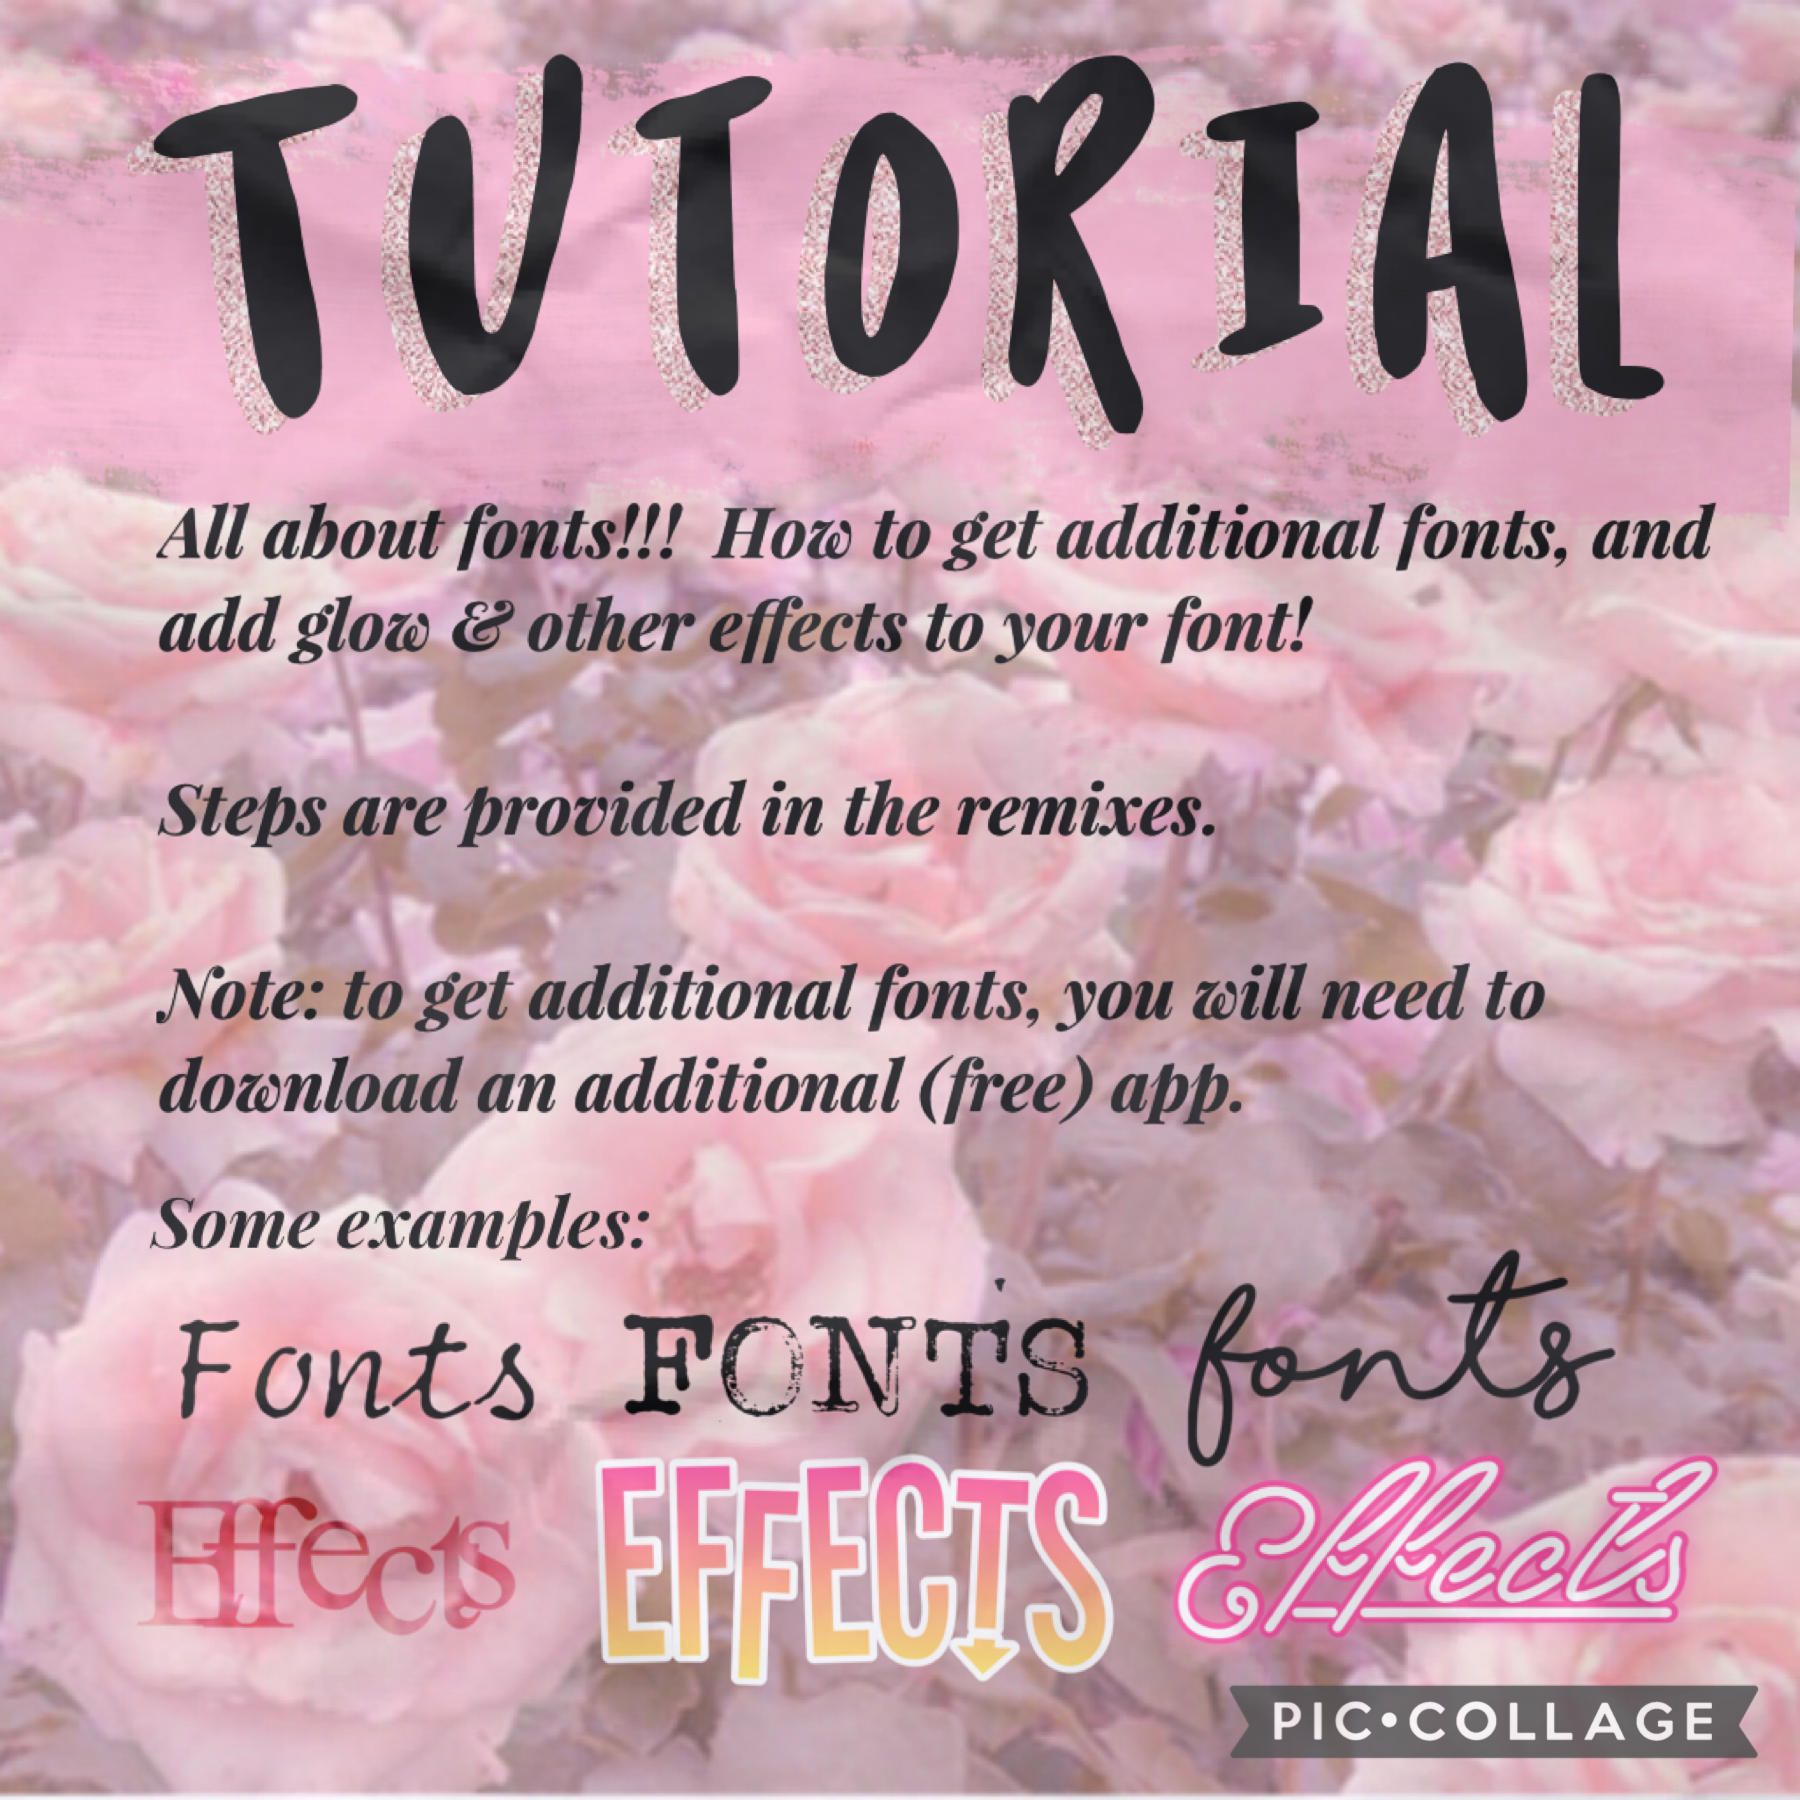 Font tutorial!  Lmk if you have any questions!